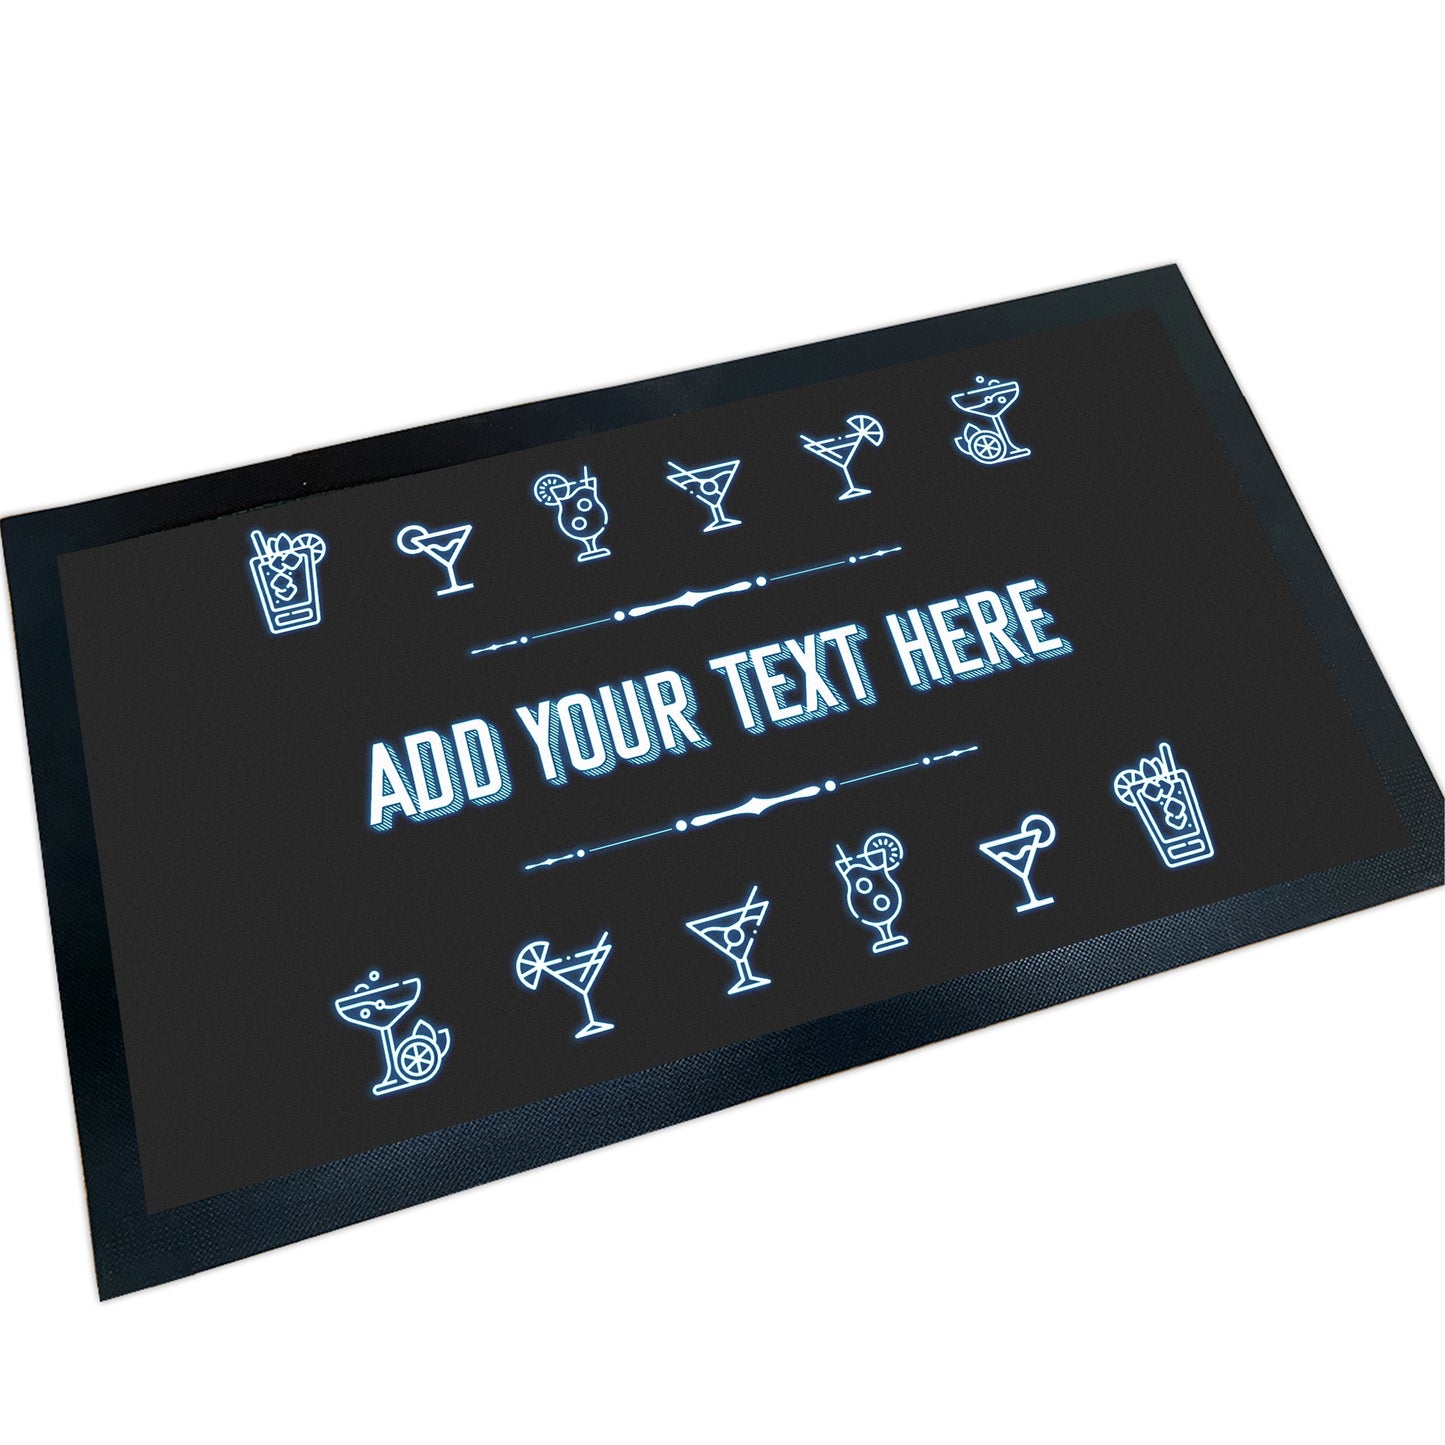 ShopQuality4U Bar Runner Gripped Rubber Backing 44 x 25cm (17.3 x 9.8'') Bar Mat Personalised Bar Runner Cocktail Glasses Design Add Own Text